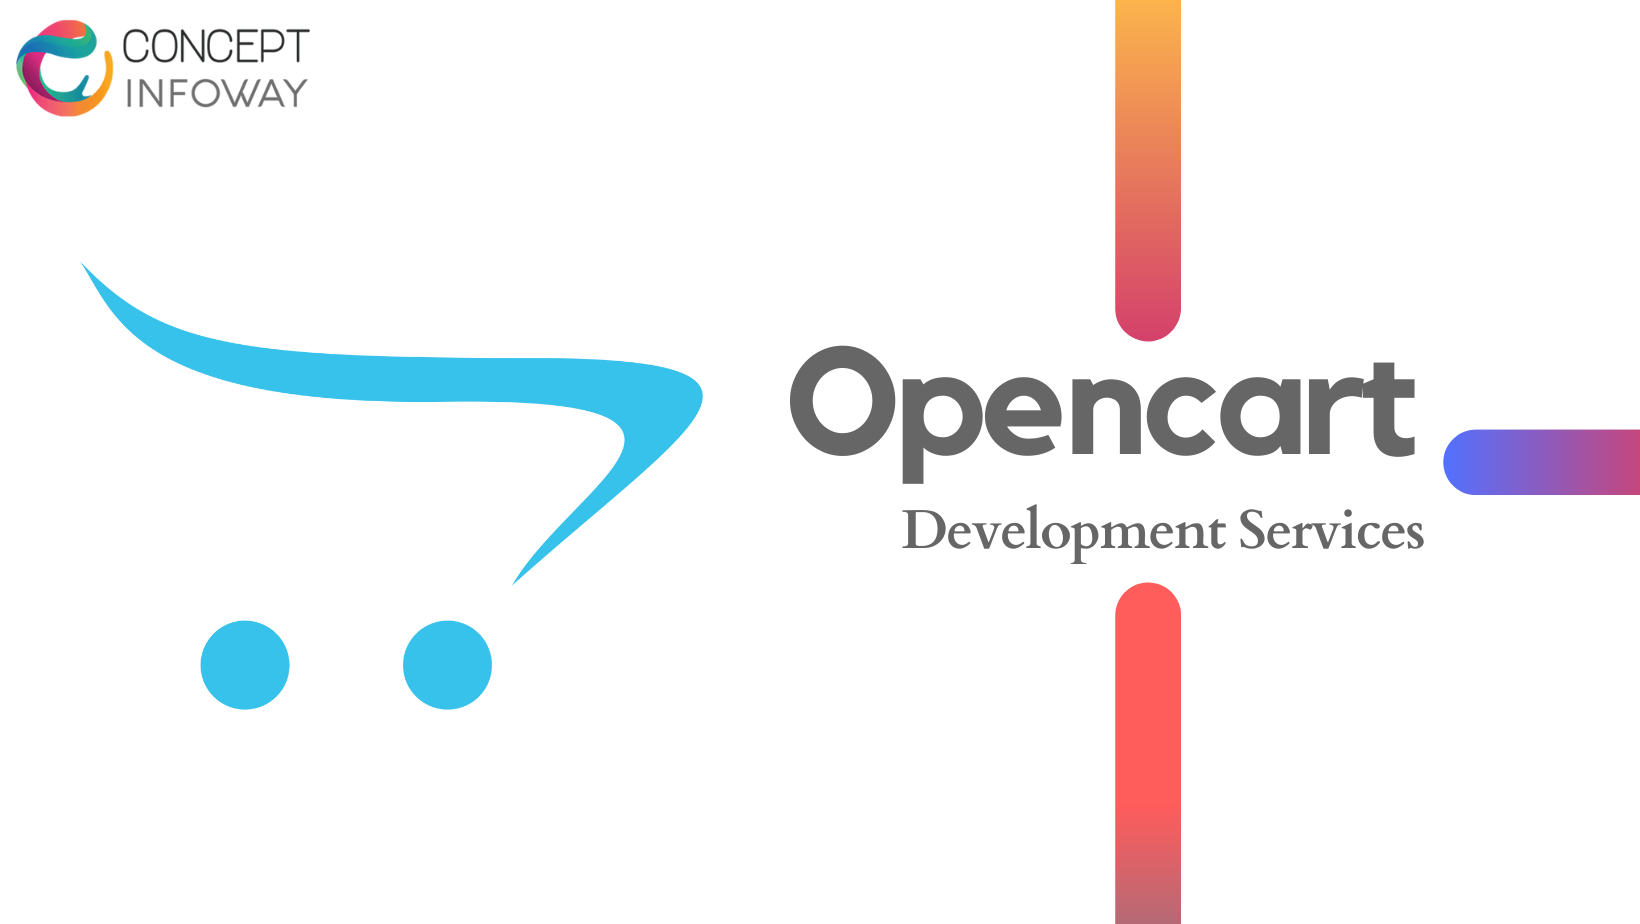 OpenCart Development Services and Why You Should Choose Them